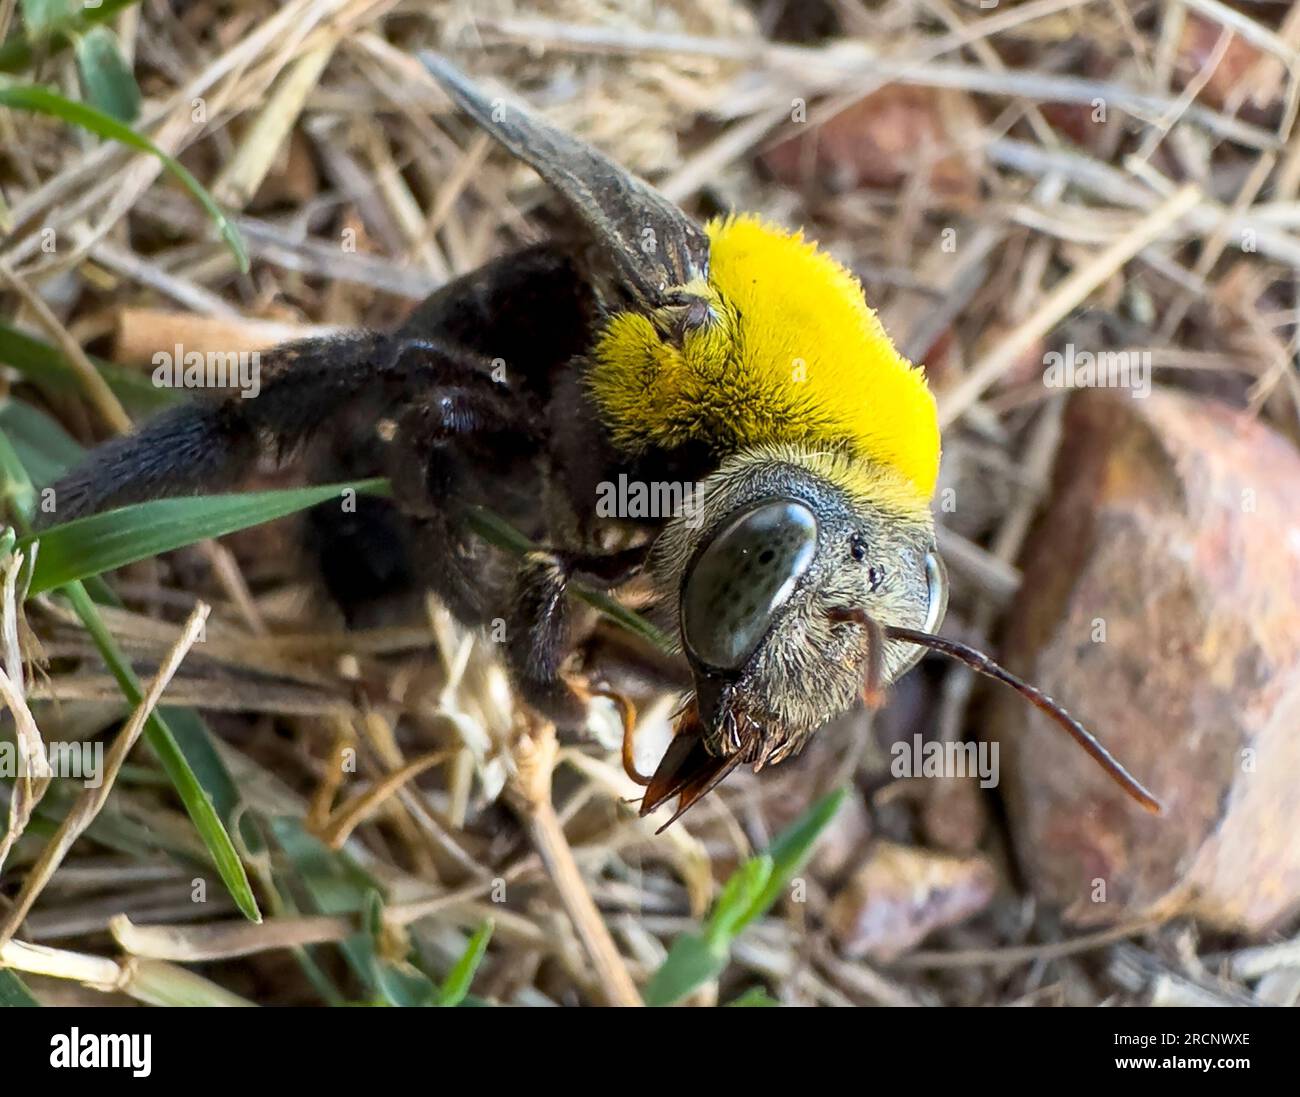 carpenter bees found only in northern Australia. Stock Photo